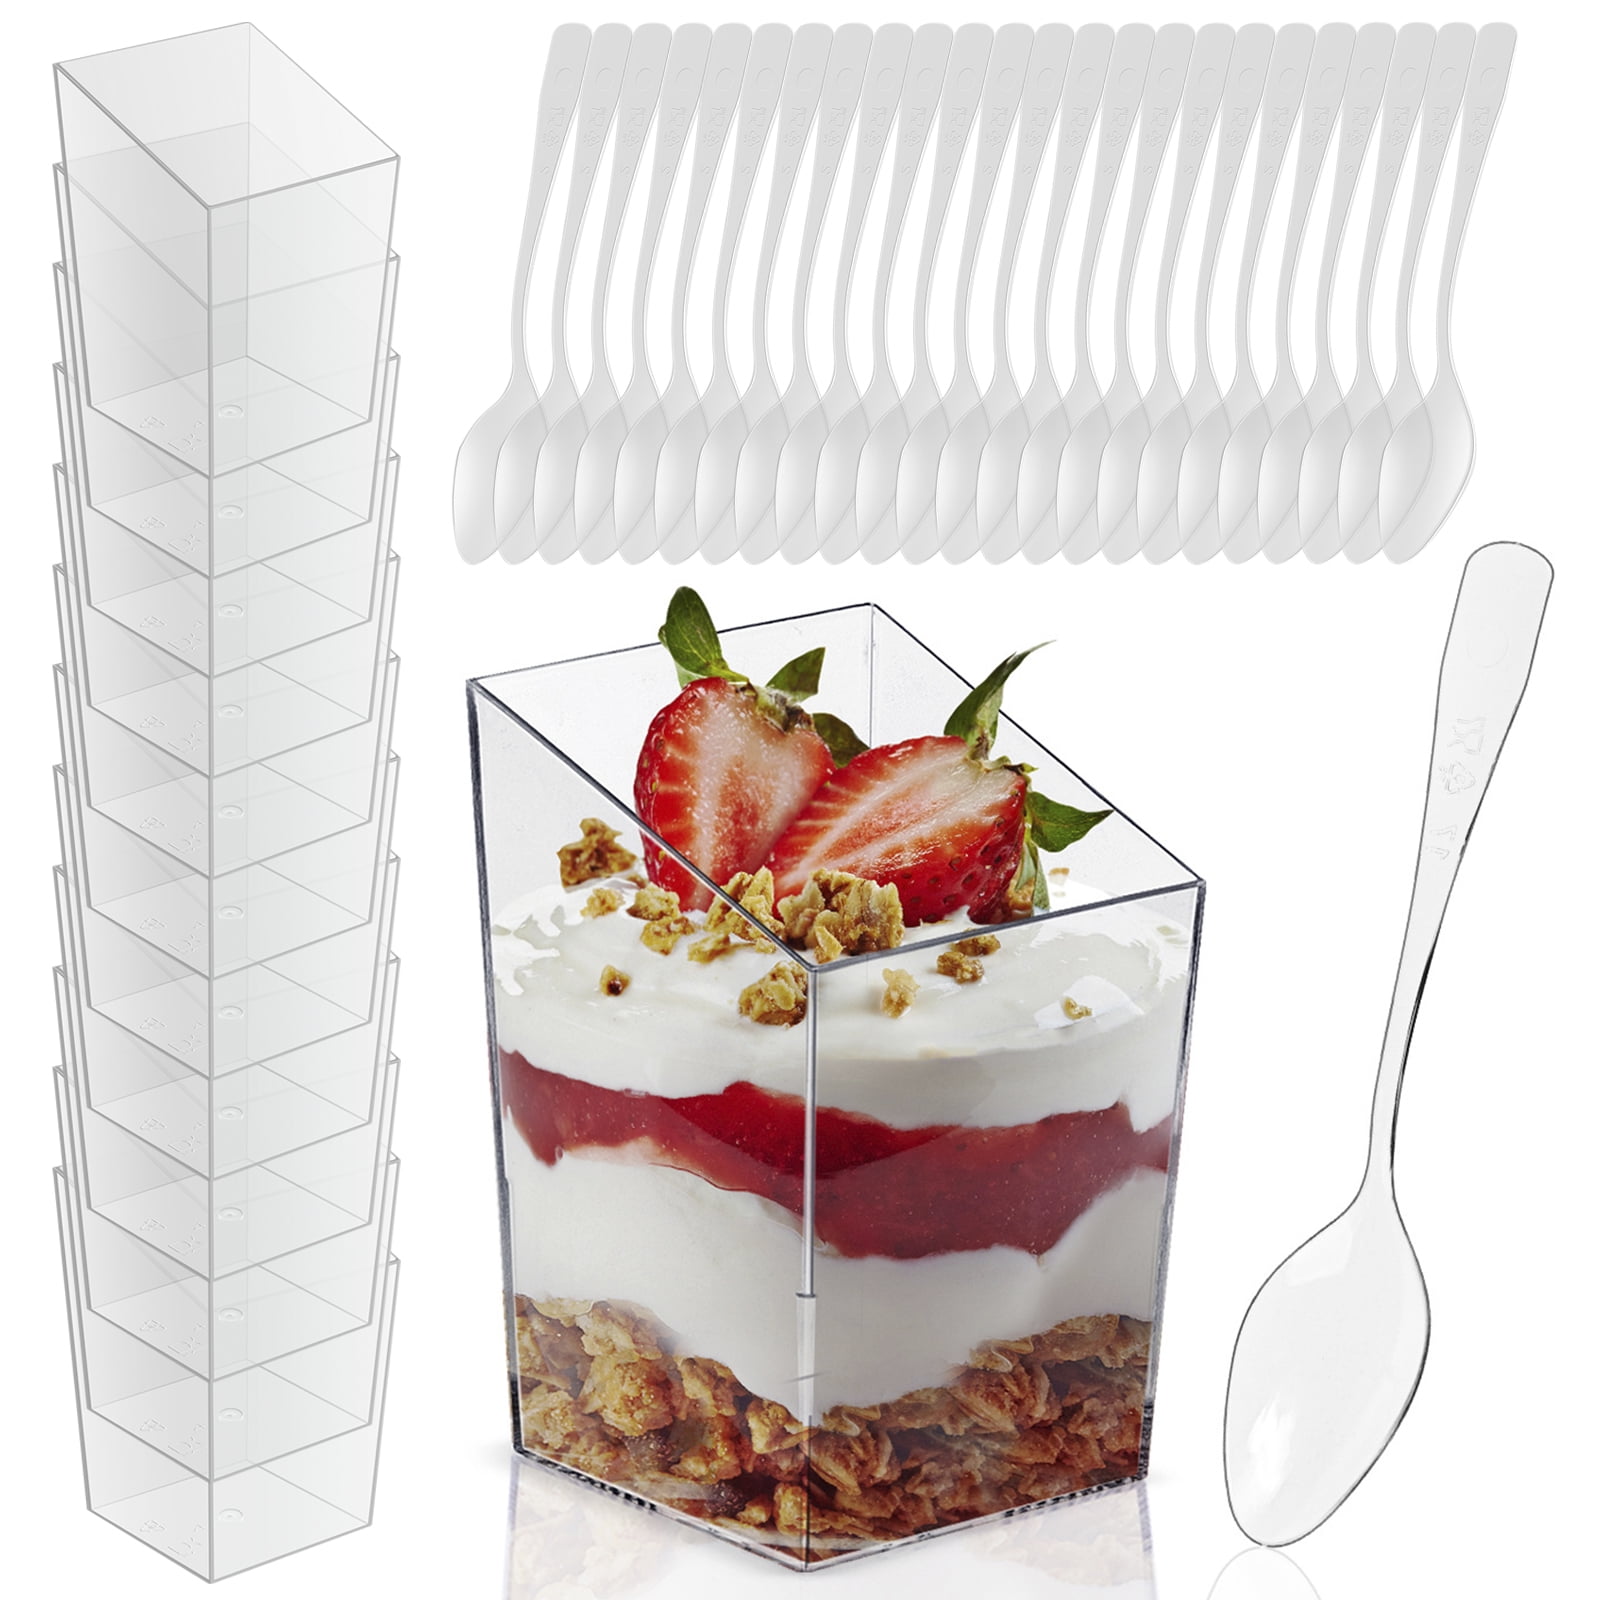 Dlux 100 x 3 oz Mini Dessert Cups with Spoons and Lids, Square Tall - Clear Plastic Parfait Appetizer Cup - Small Reusable Serving Bowl for Party